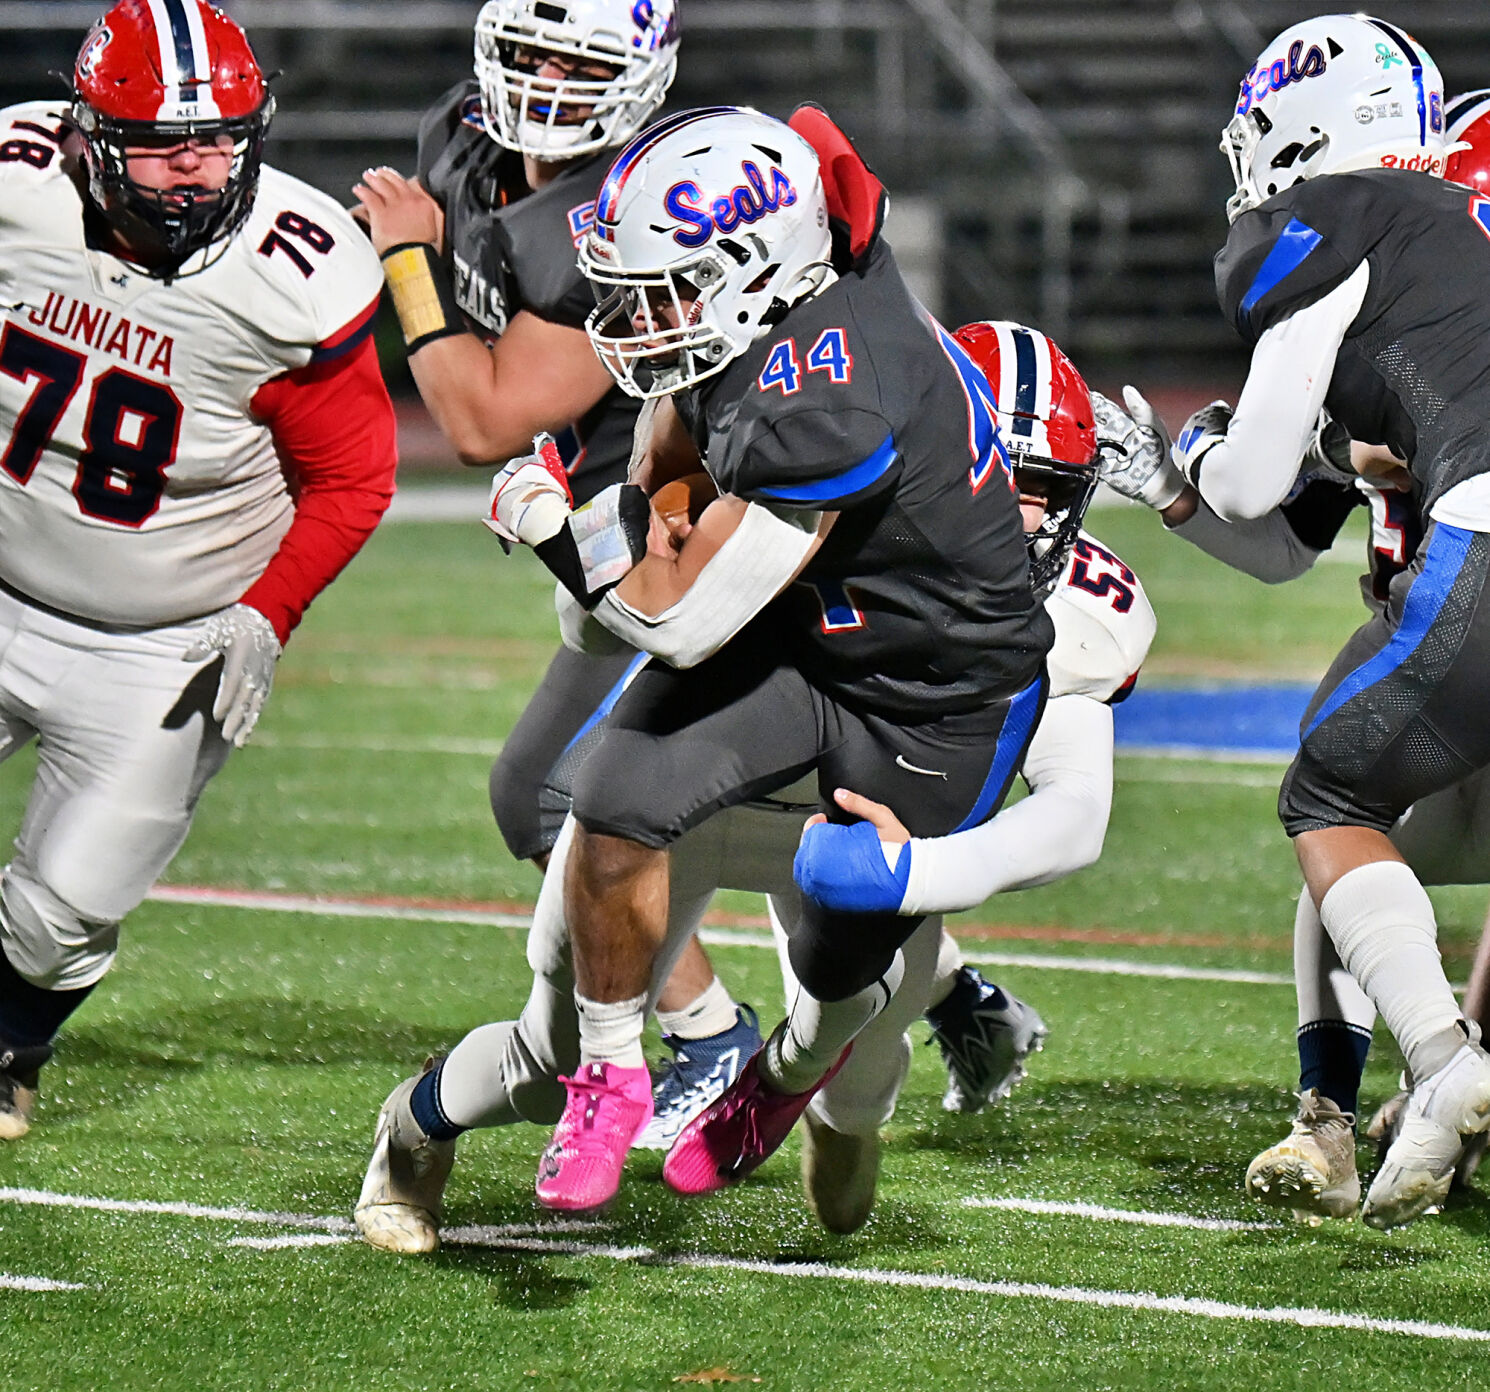 Selinsgrove Seals Take on WPIAL Powerhouse Aliquippa in State Championship Clash